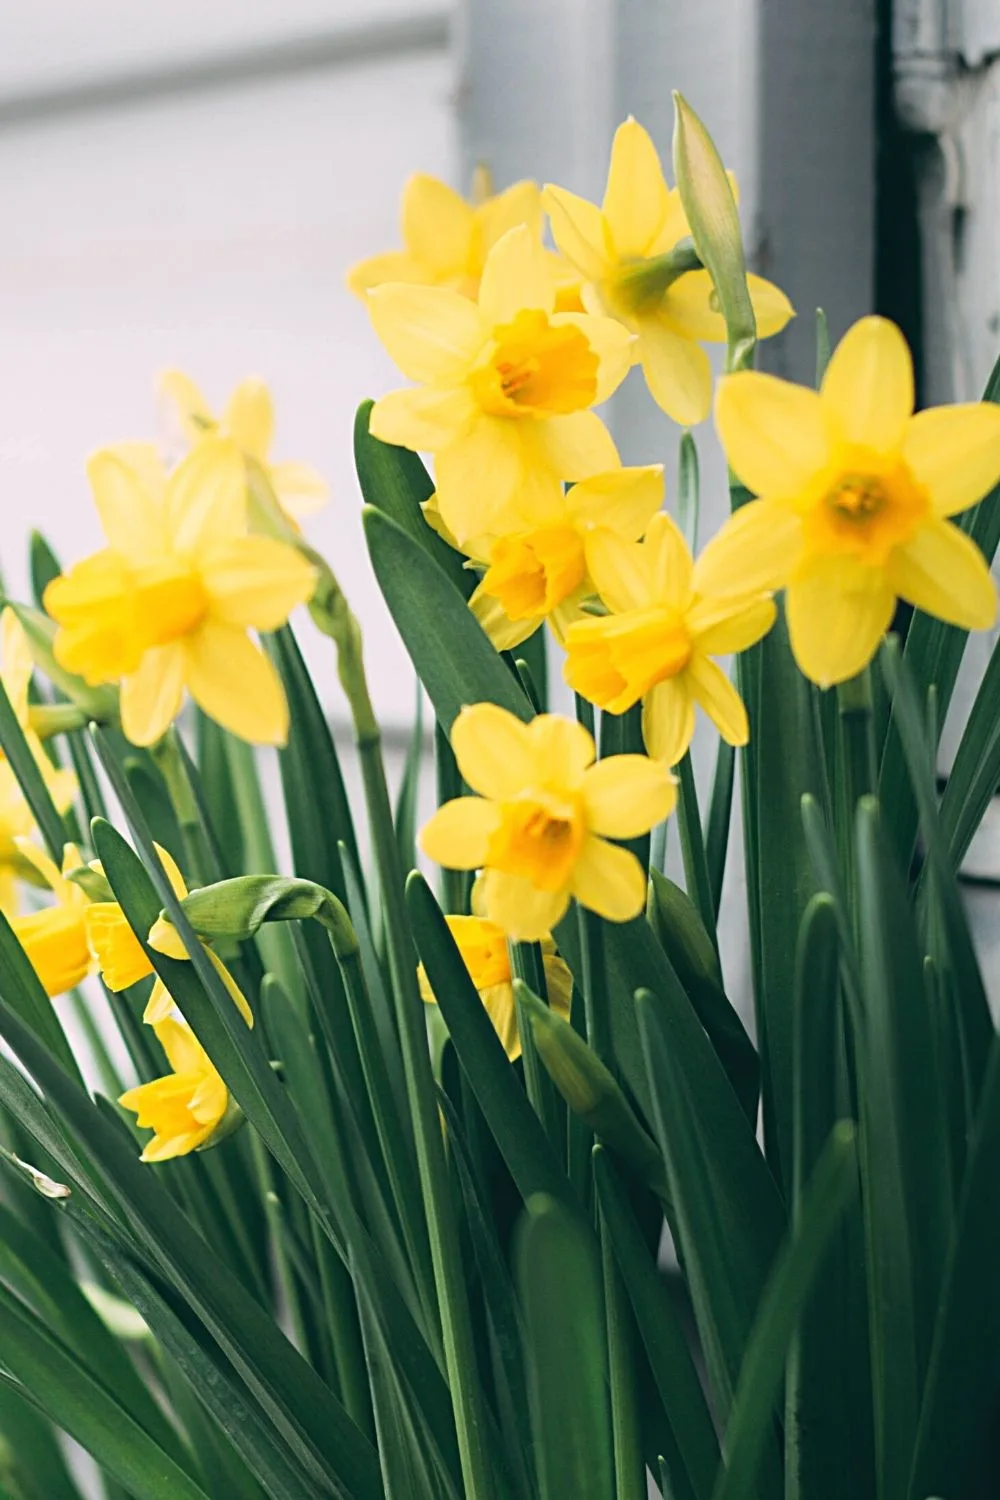 Daffodils are easy-to-grow plants that you can grow on your east facing balcony